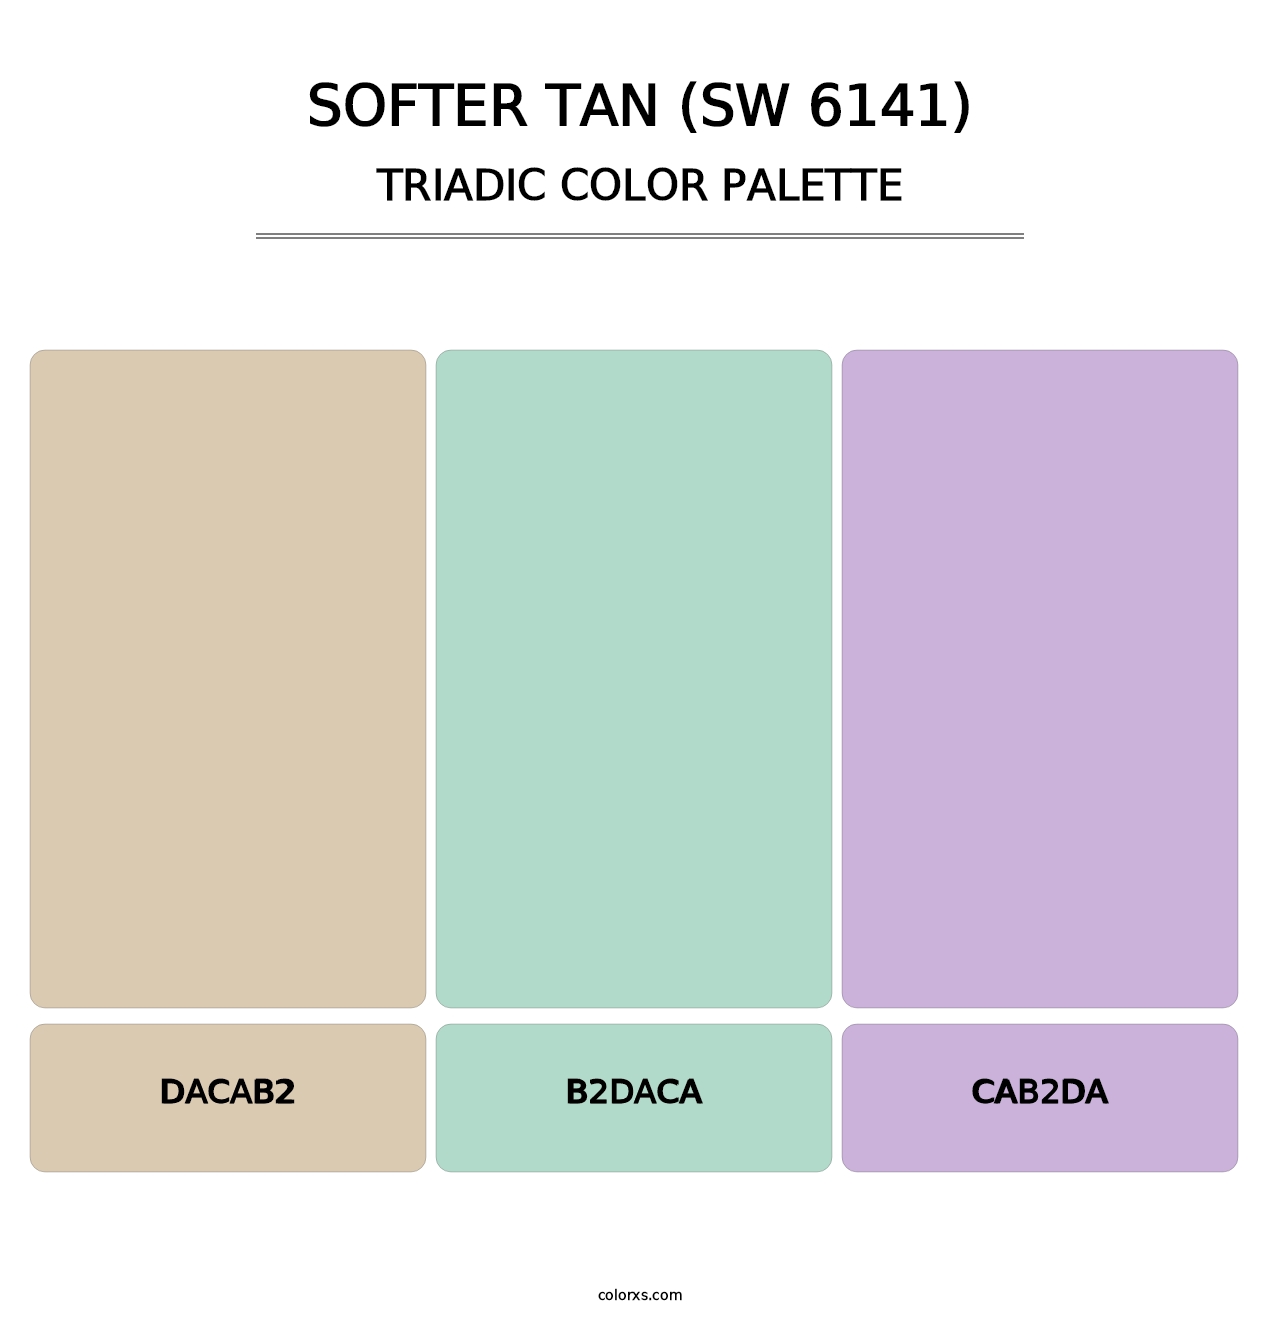 Softer Tan (SW 6141) - Triadic Color Palette